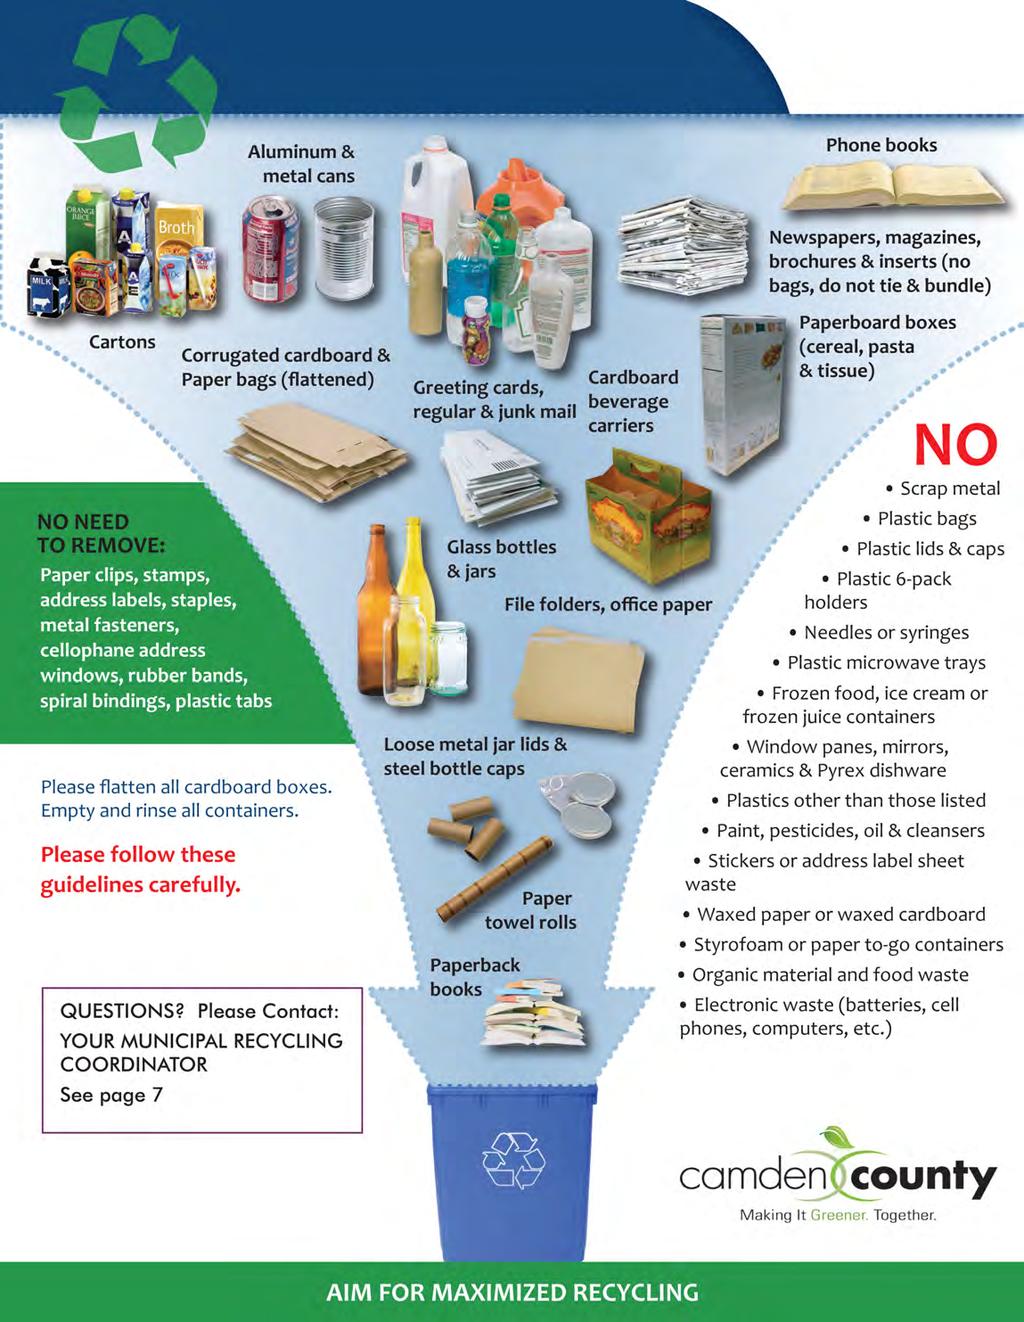 Residential Guide to Single Stream Recycling #1, #2 and